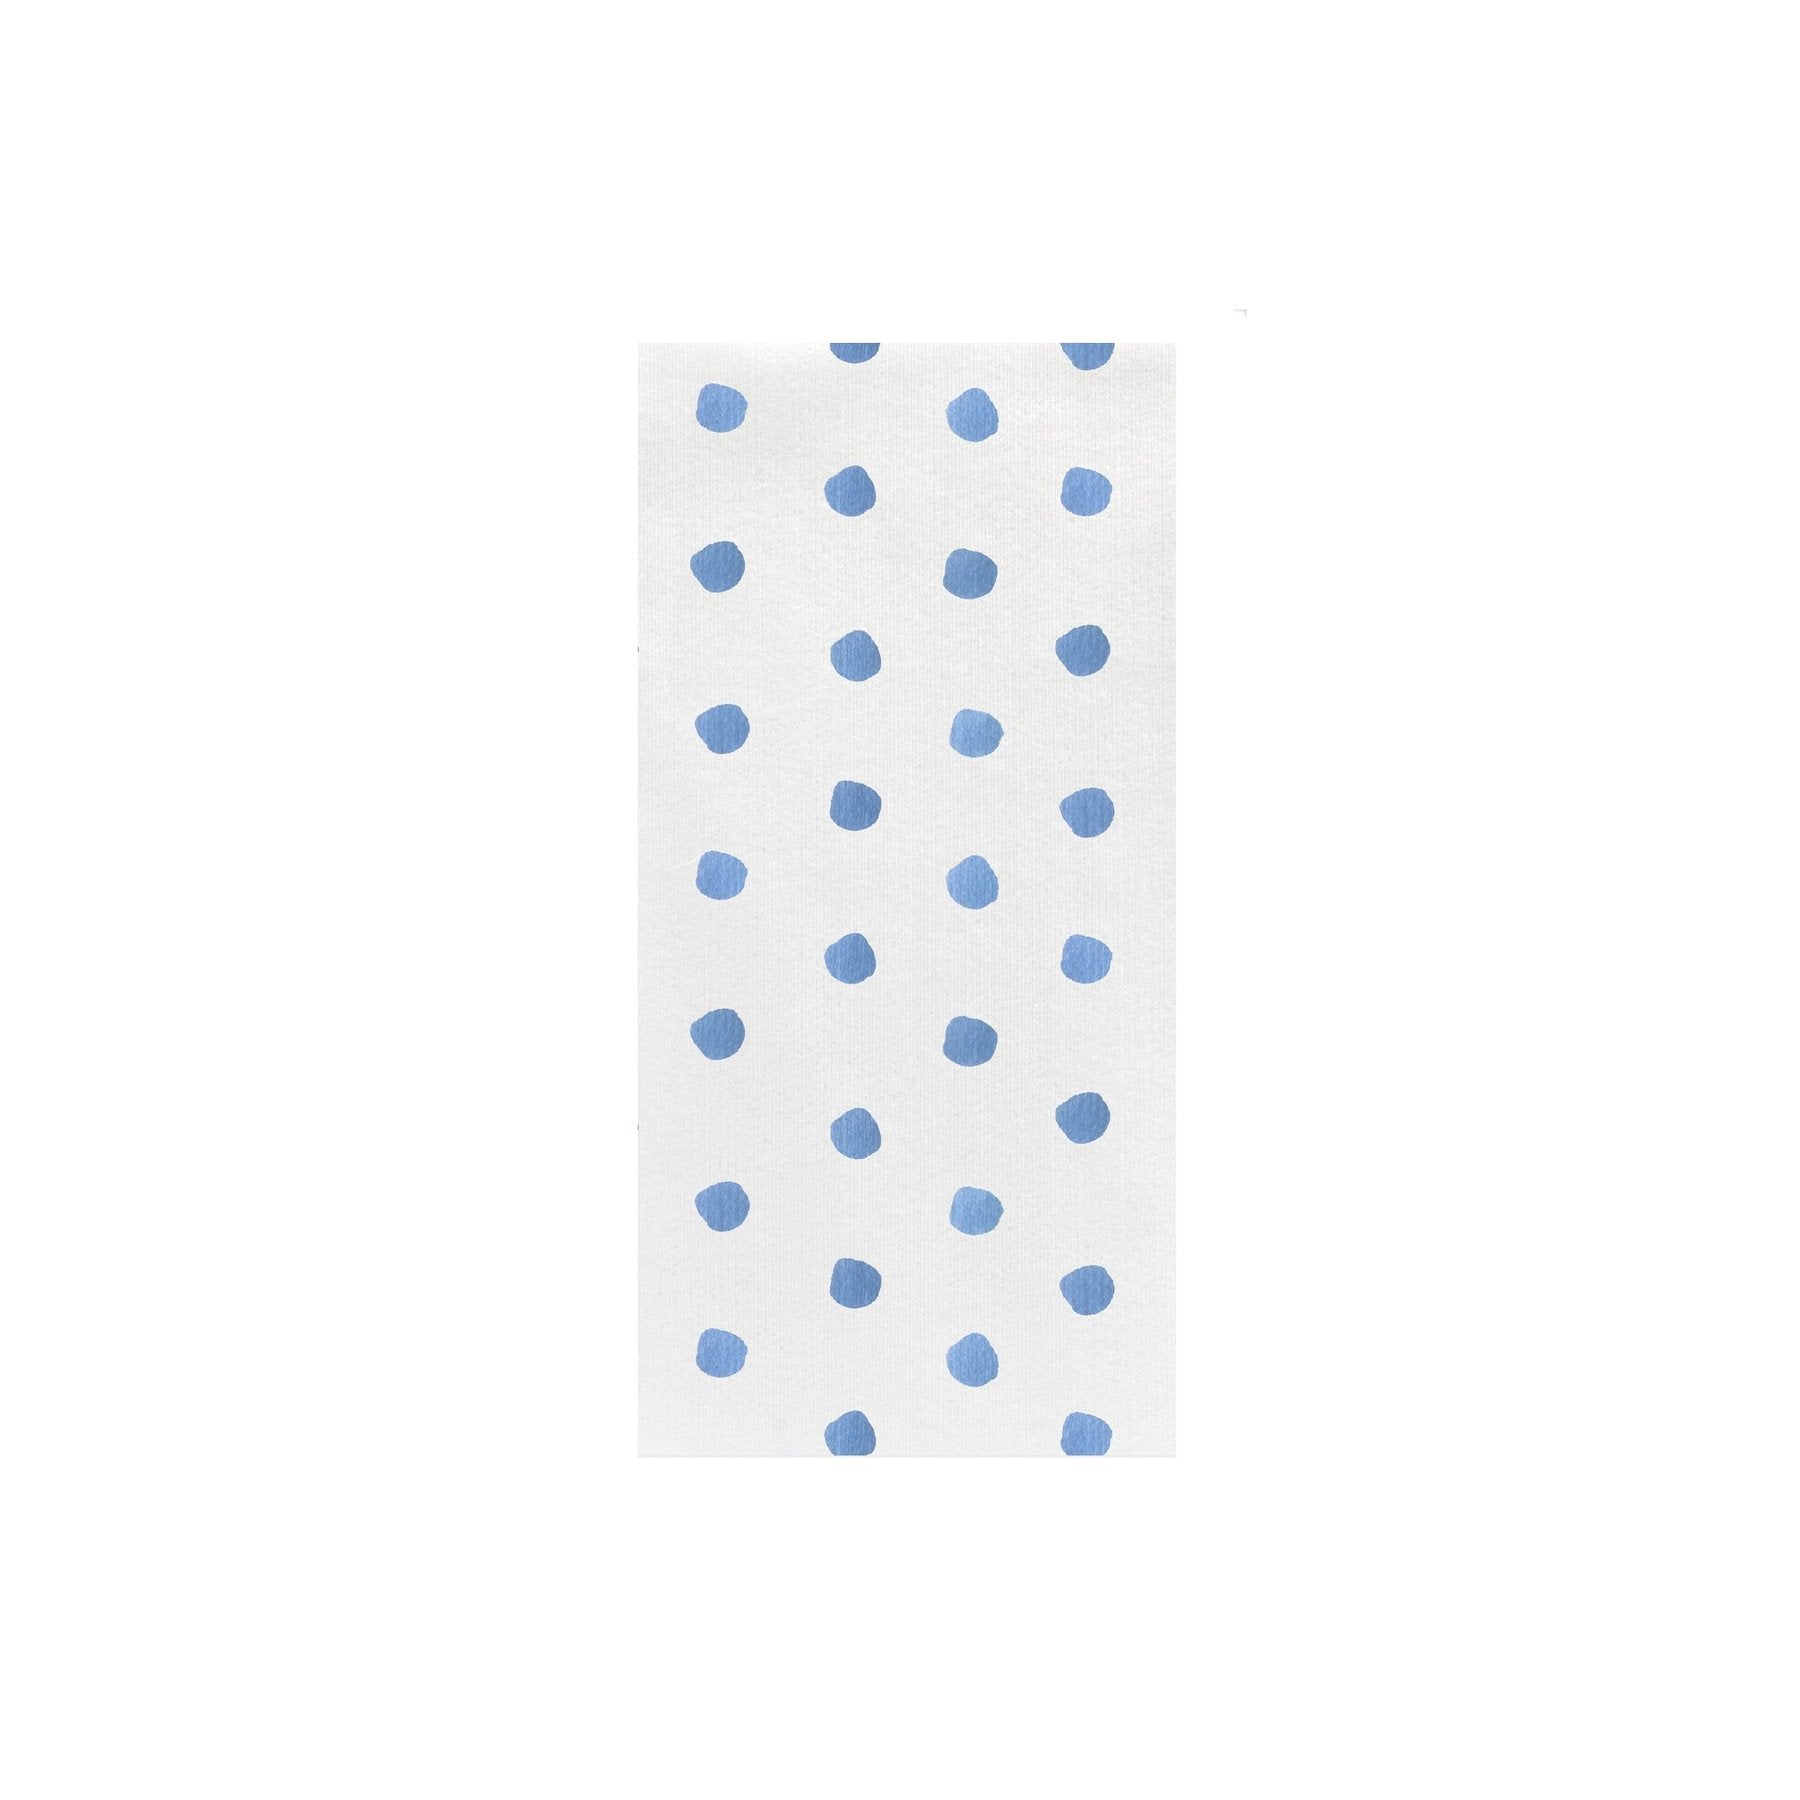 Papersoft Napkins Light Blue Dot Guest Towels - Pack of 20